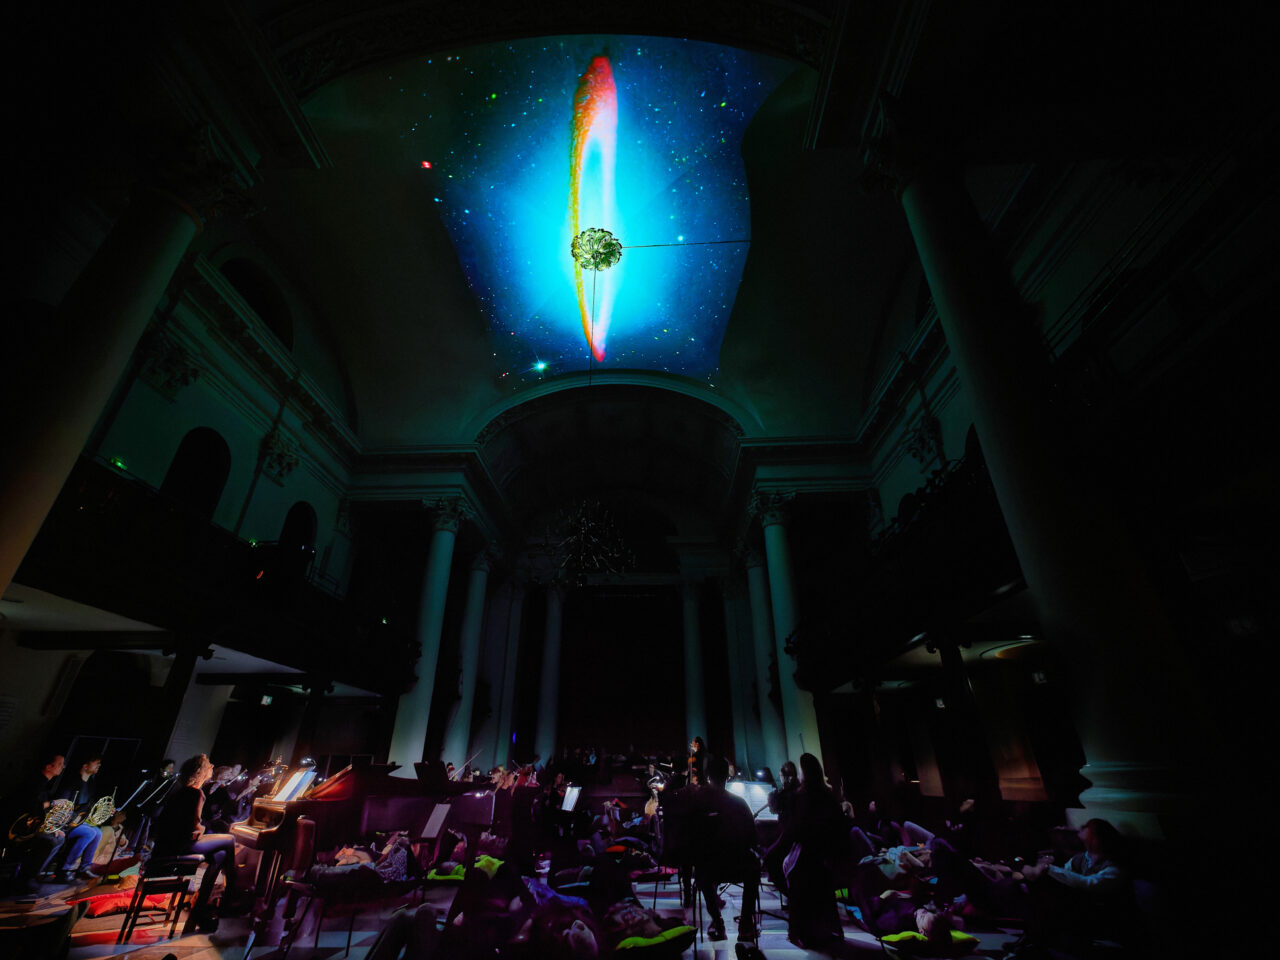 Sinfonia Smith Square #ConcertLab: The Night Sky. An immersive planetarium concert. 